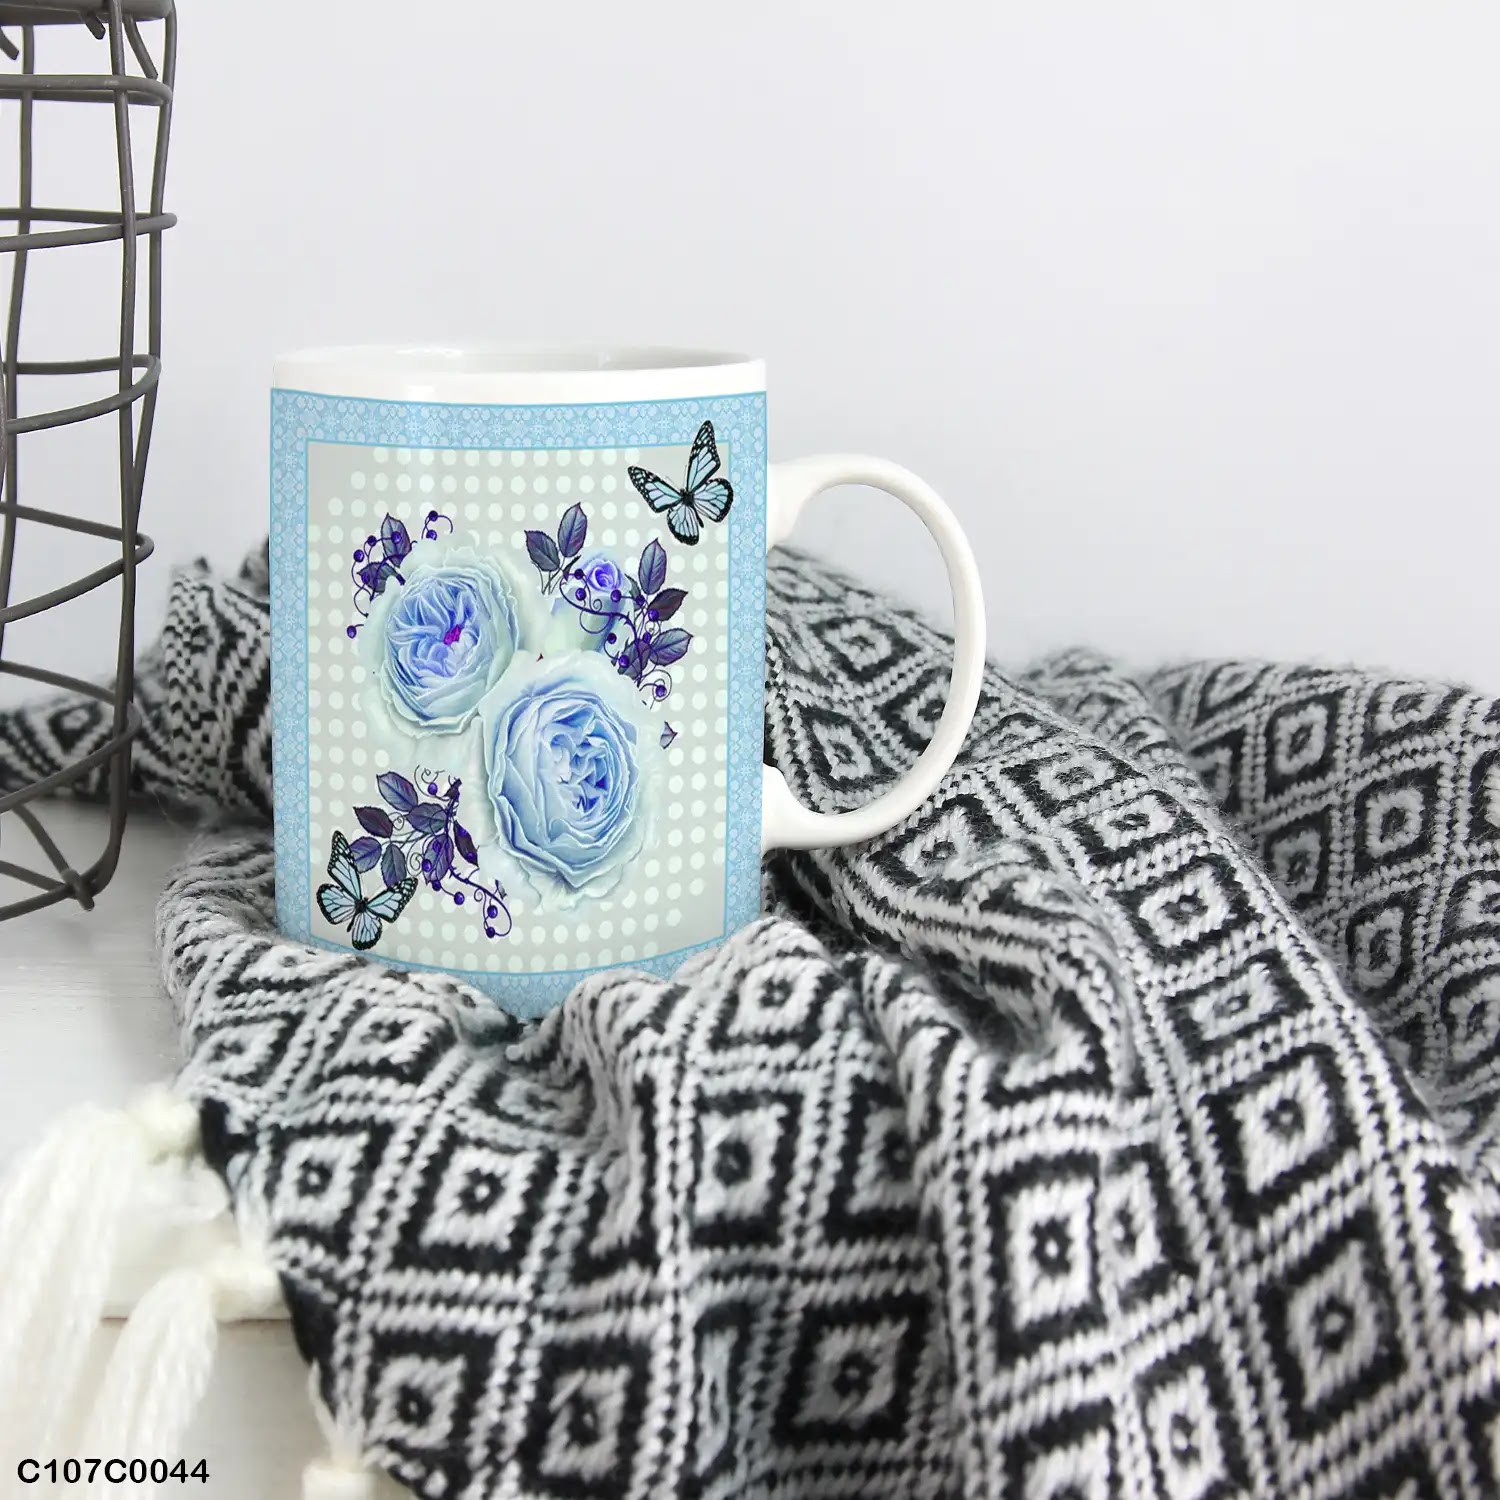 A blue mug (cup) printed with an image of blue flowers and butterflies